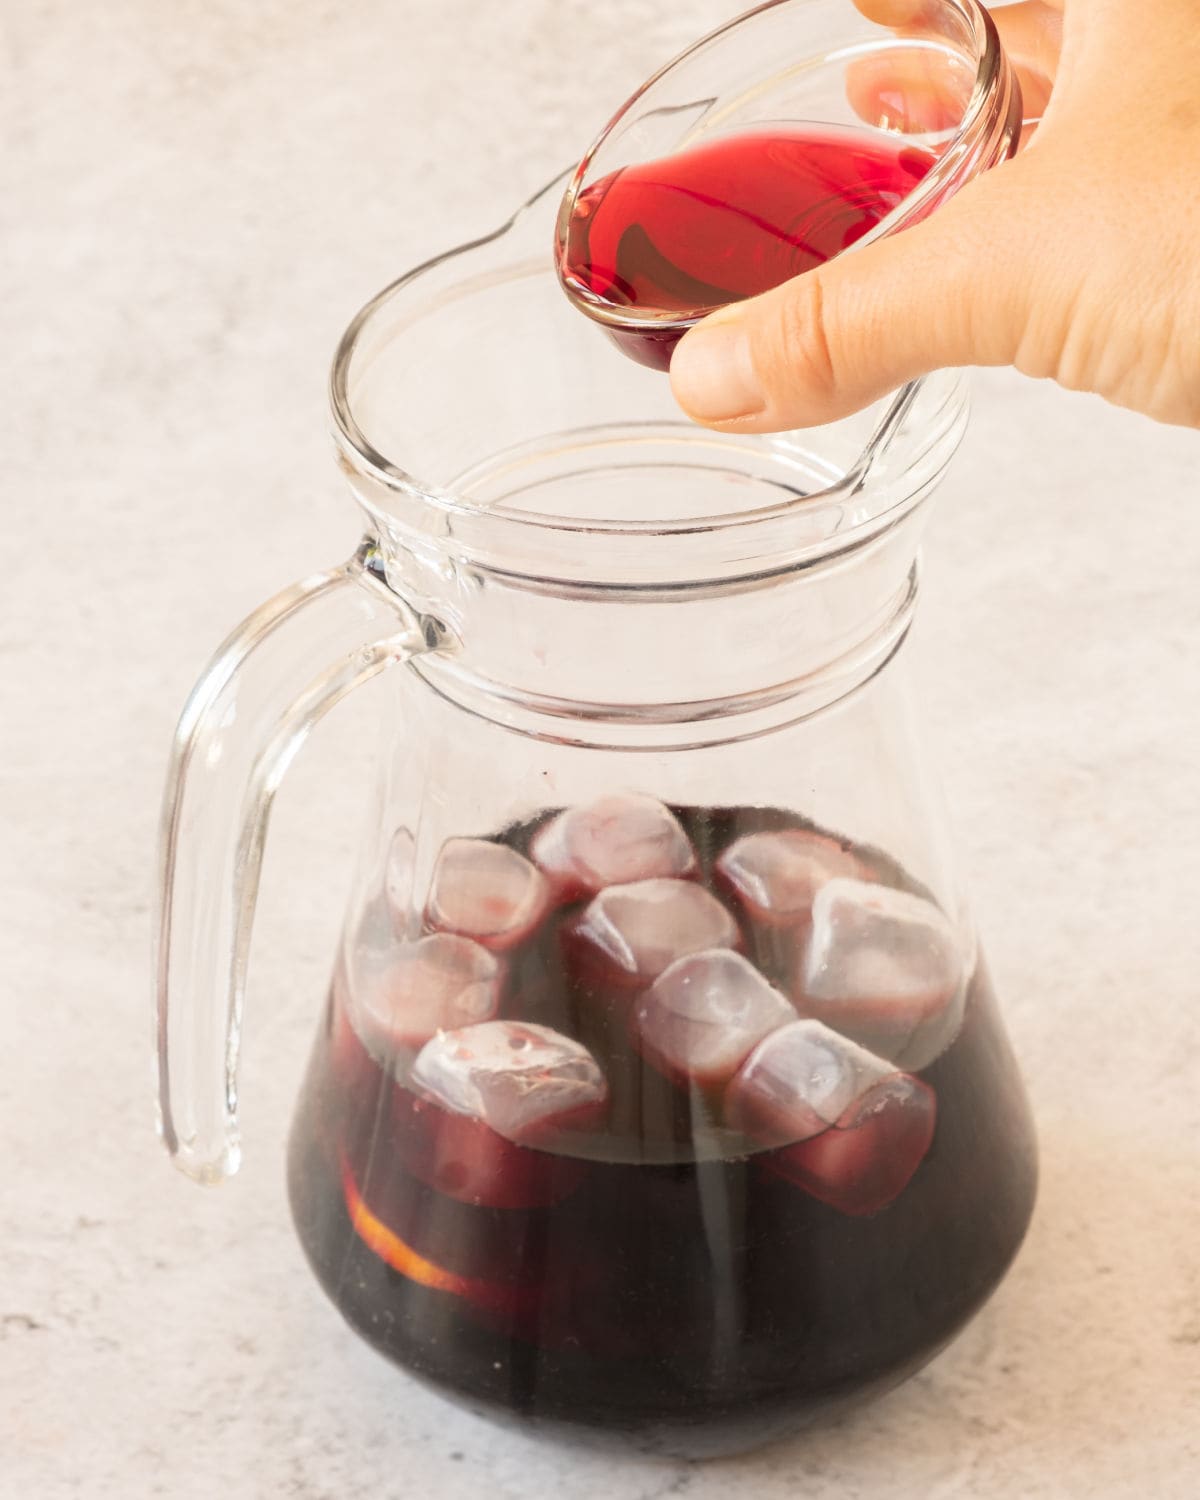 Adding cranberry juice to a pitcher with red wine, citrus slices and ice. Light surface.